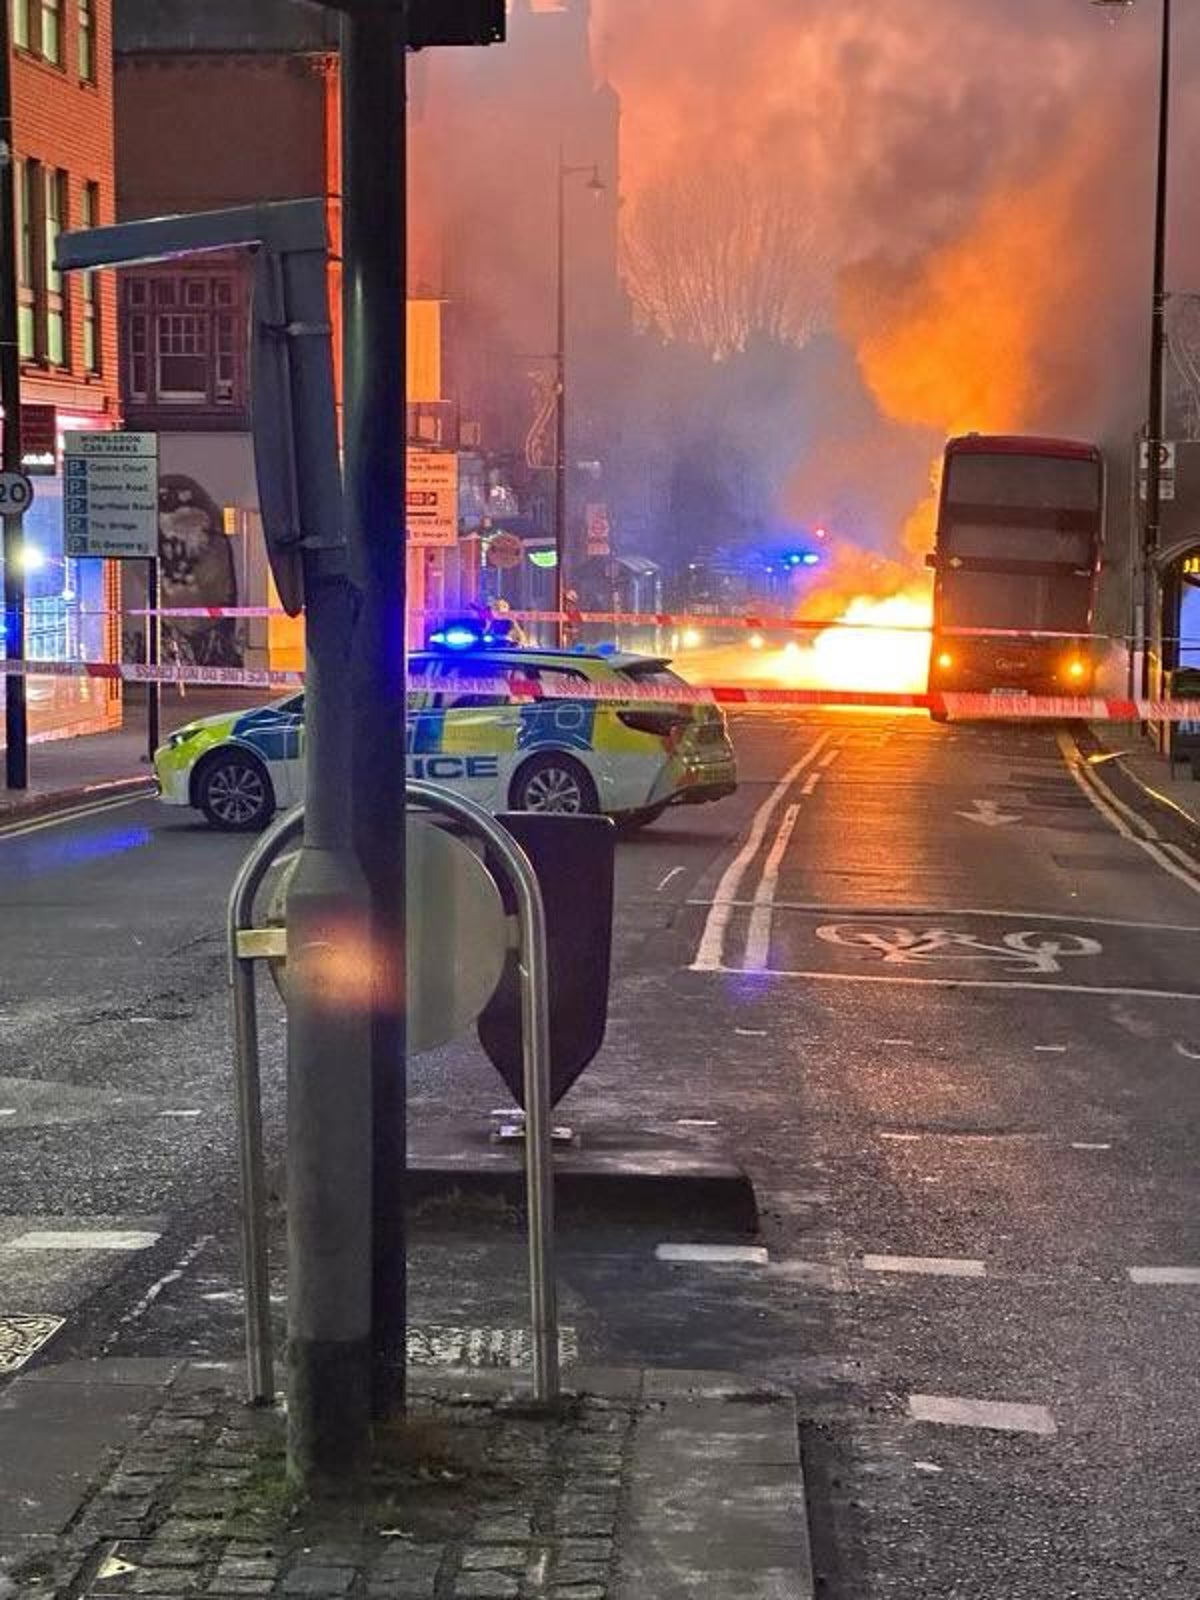 double-decker bus bursts into flames during morning rush hour in wimbledon